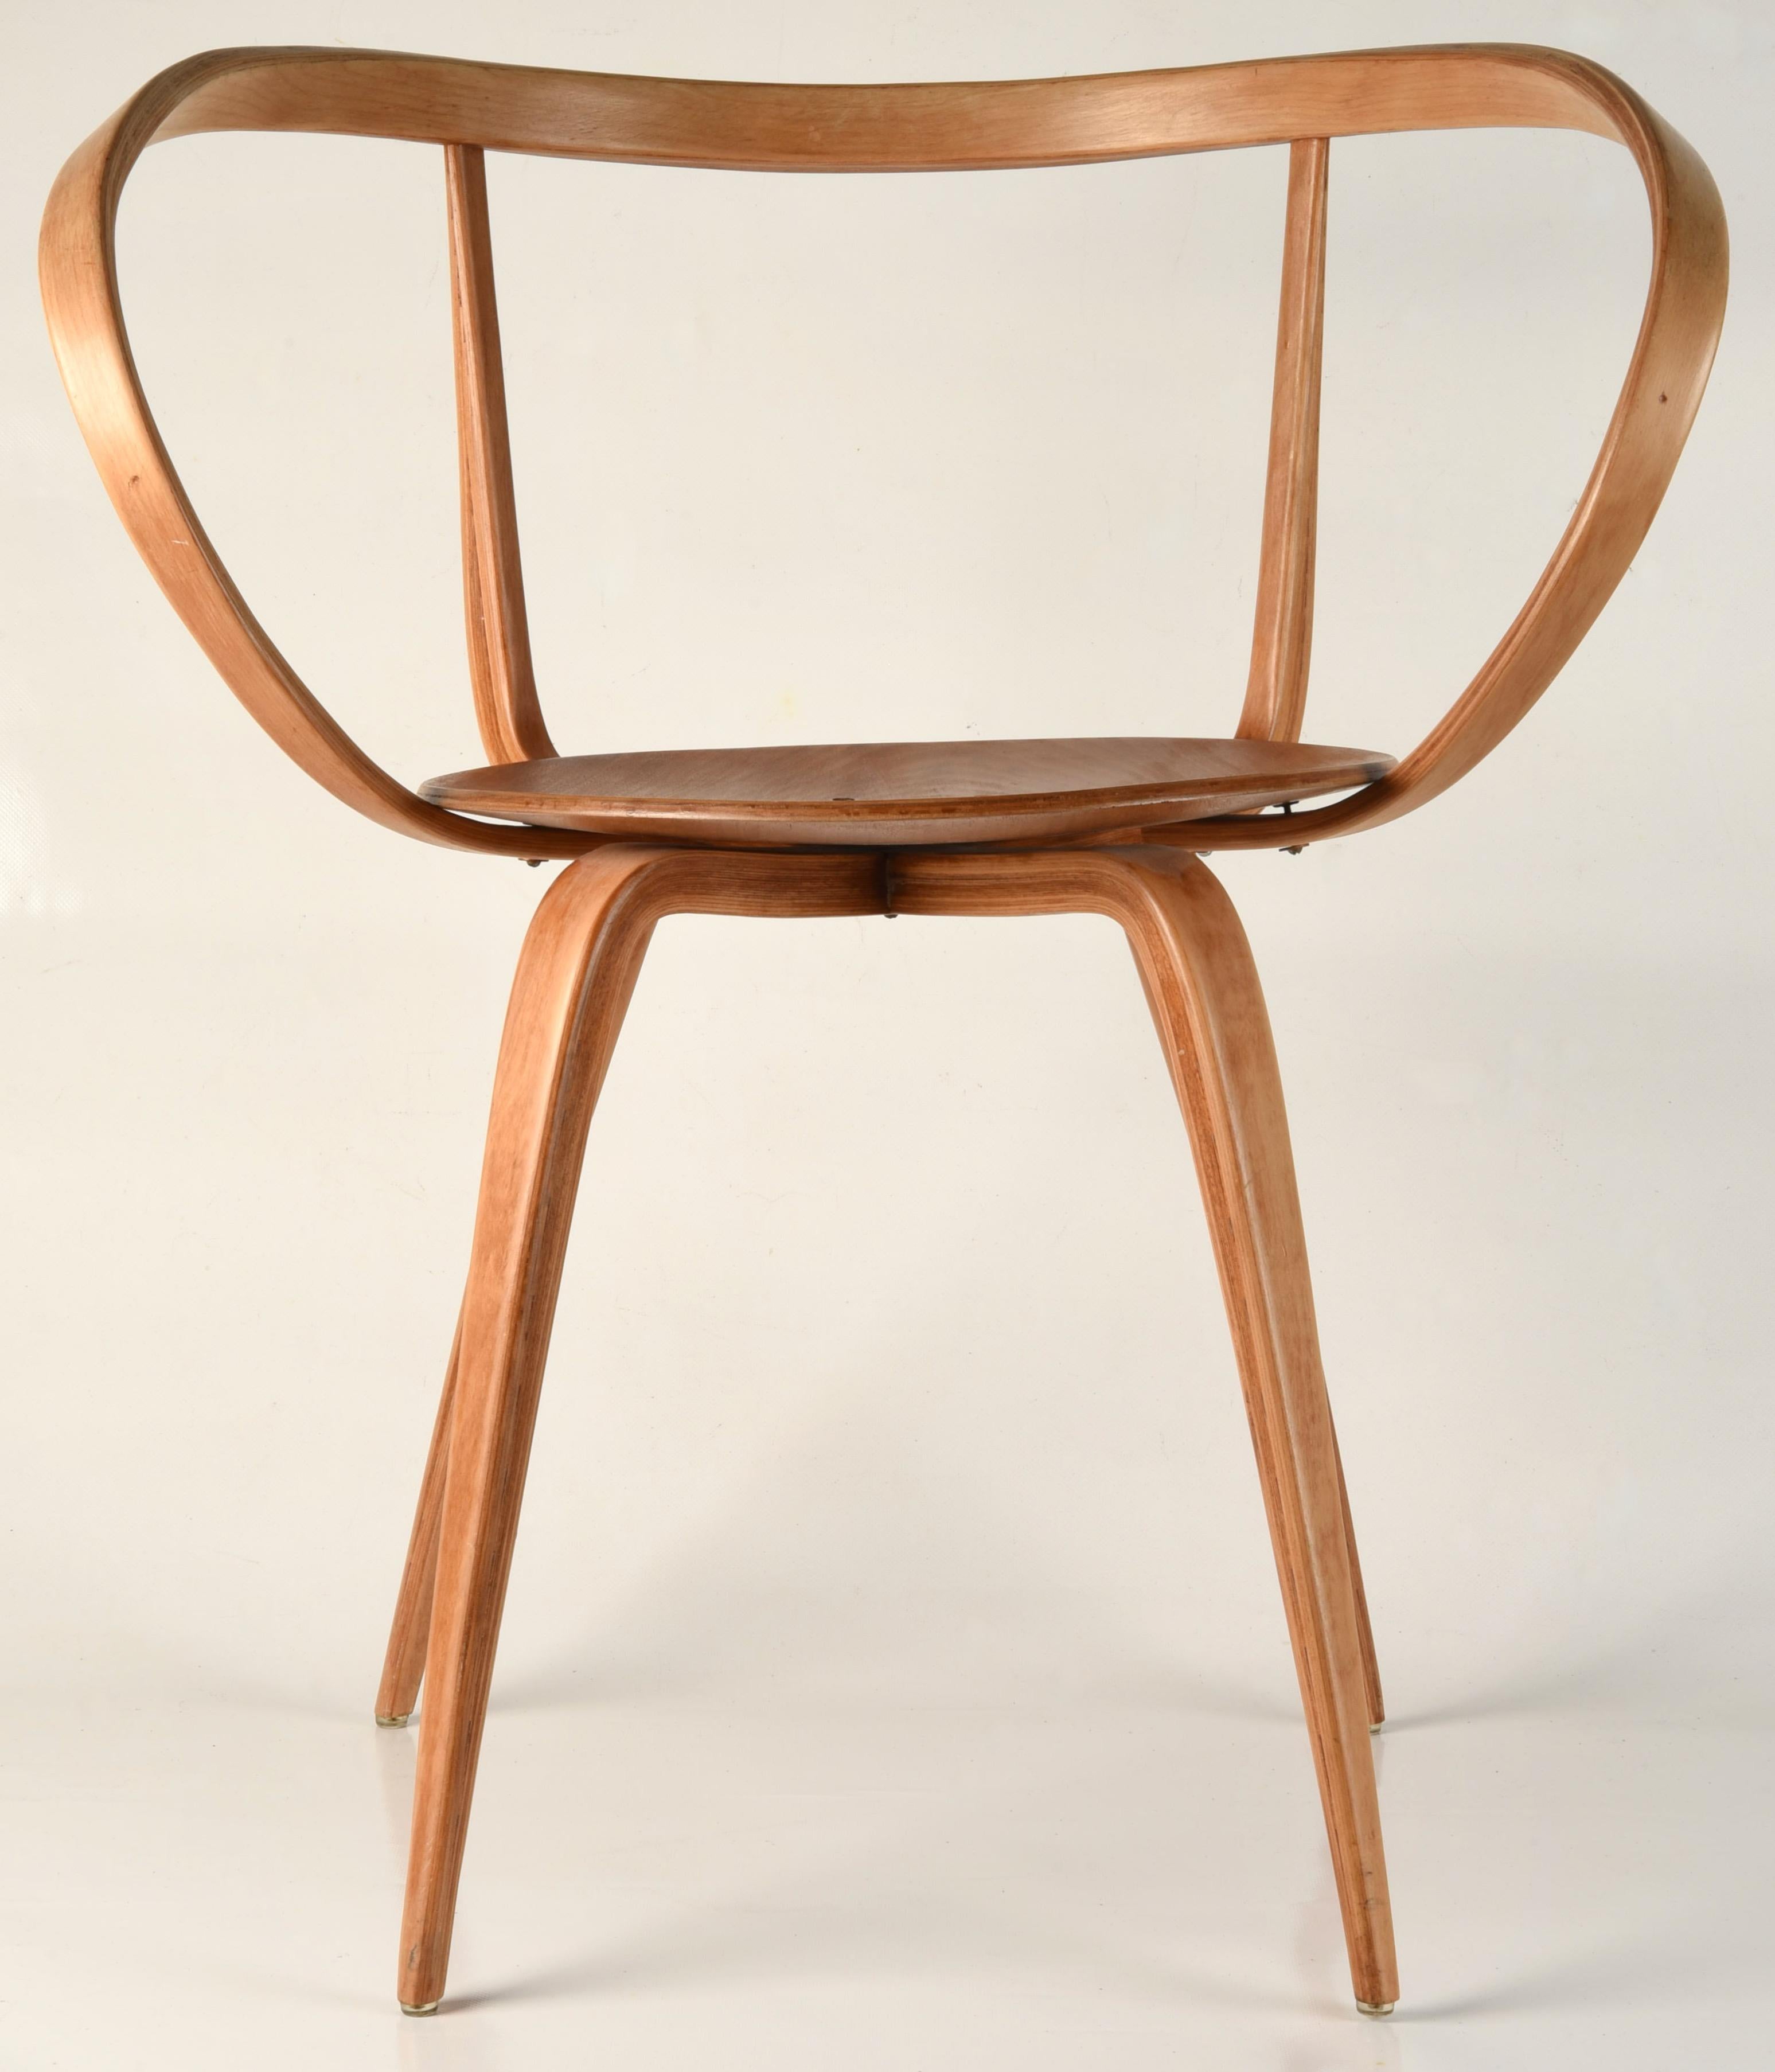 Original Early George Nelson for Herman Miller Pretzel Chair  In Good Condition For Sale In Sarasota, FL